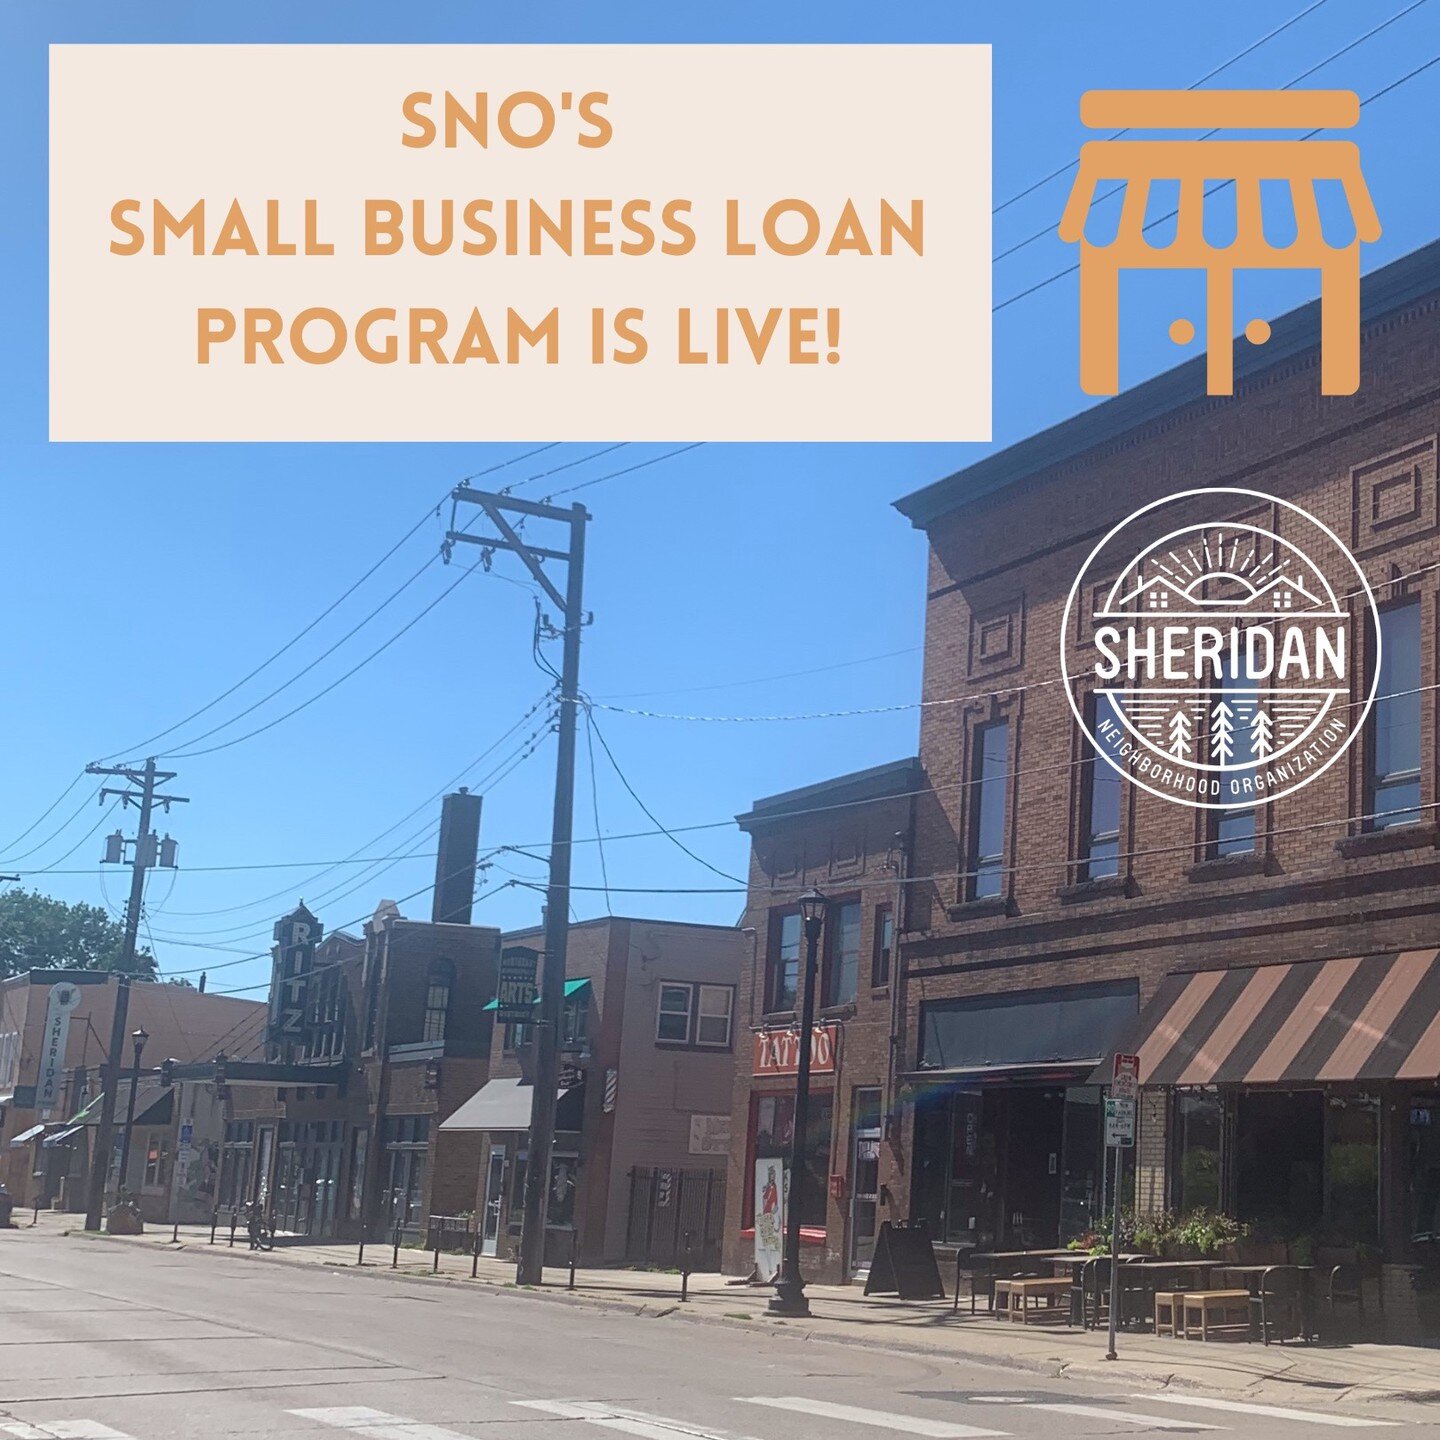 Do you own a small business that serves Sheridan and the surrounding area?

Check out our Small Business Loan Program to make improvements to your business! 

More info and apply in the link in bio

#northeastminneapolis #smallbusiness